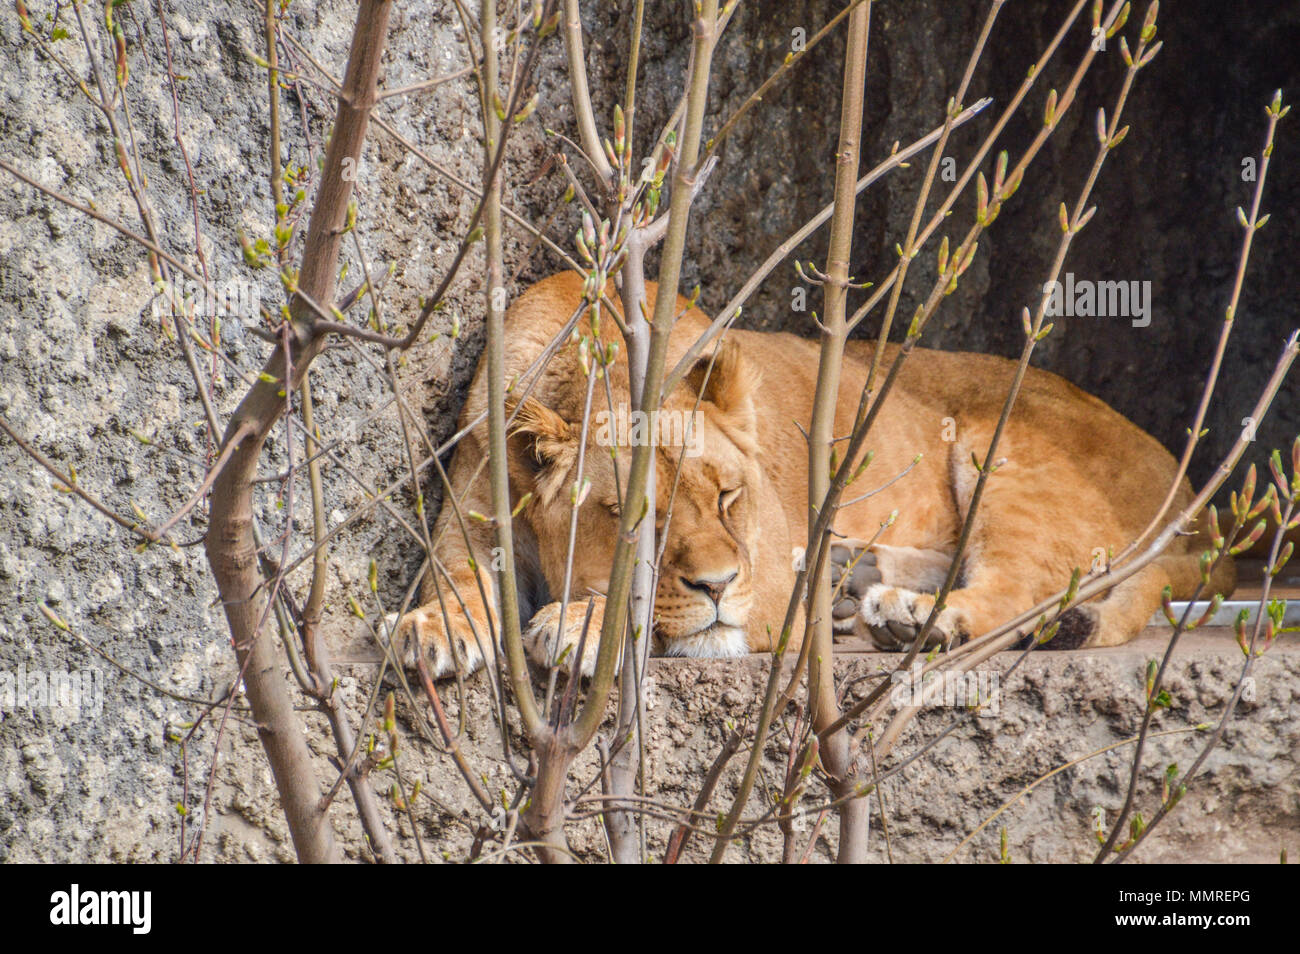 Female Lion Sleeping At The Artis Zoo Amsterdam The Netherlands Stock Photo  - Alamy